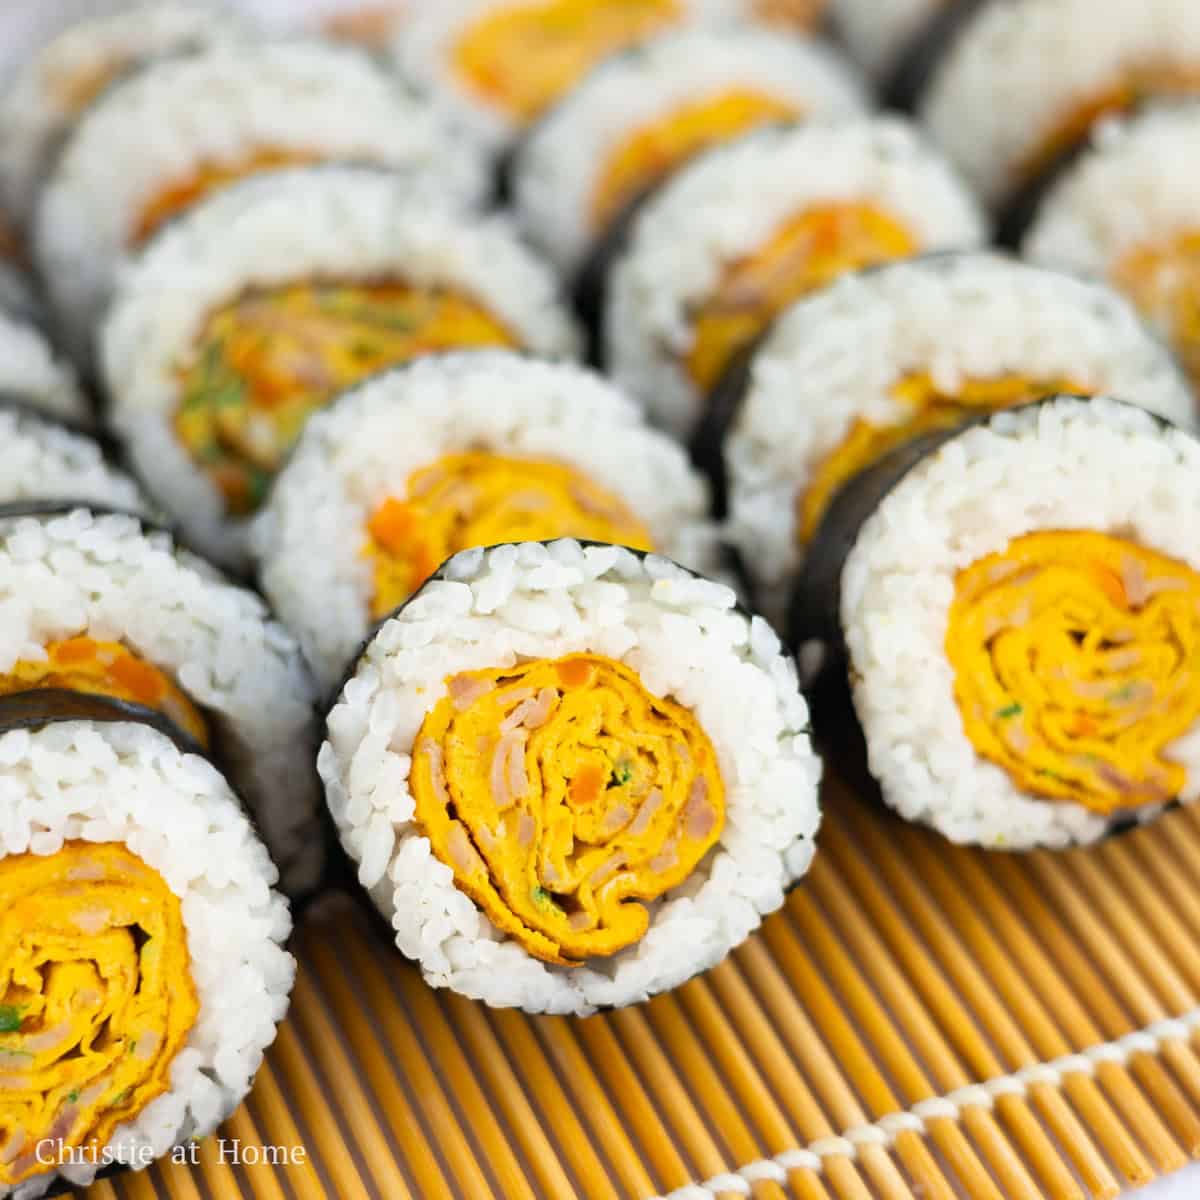 Slice each kimbap into 8 pieces that are ¾-inch wide. Repeat process for remaining rolls. Enjoy warm or at room temperature.